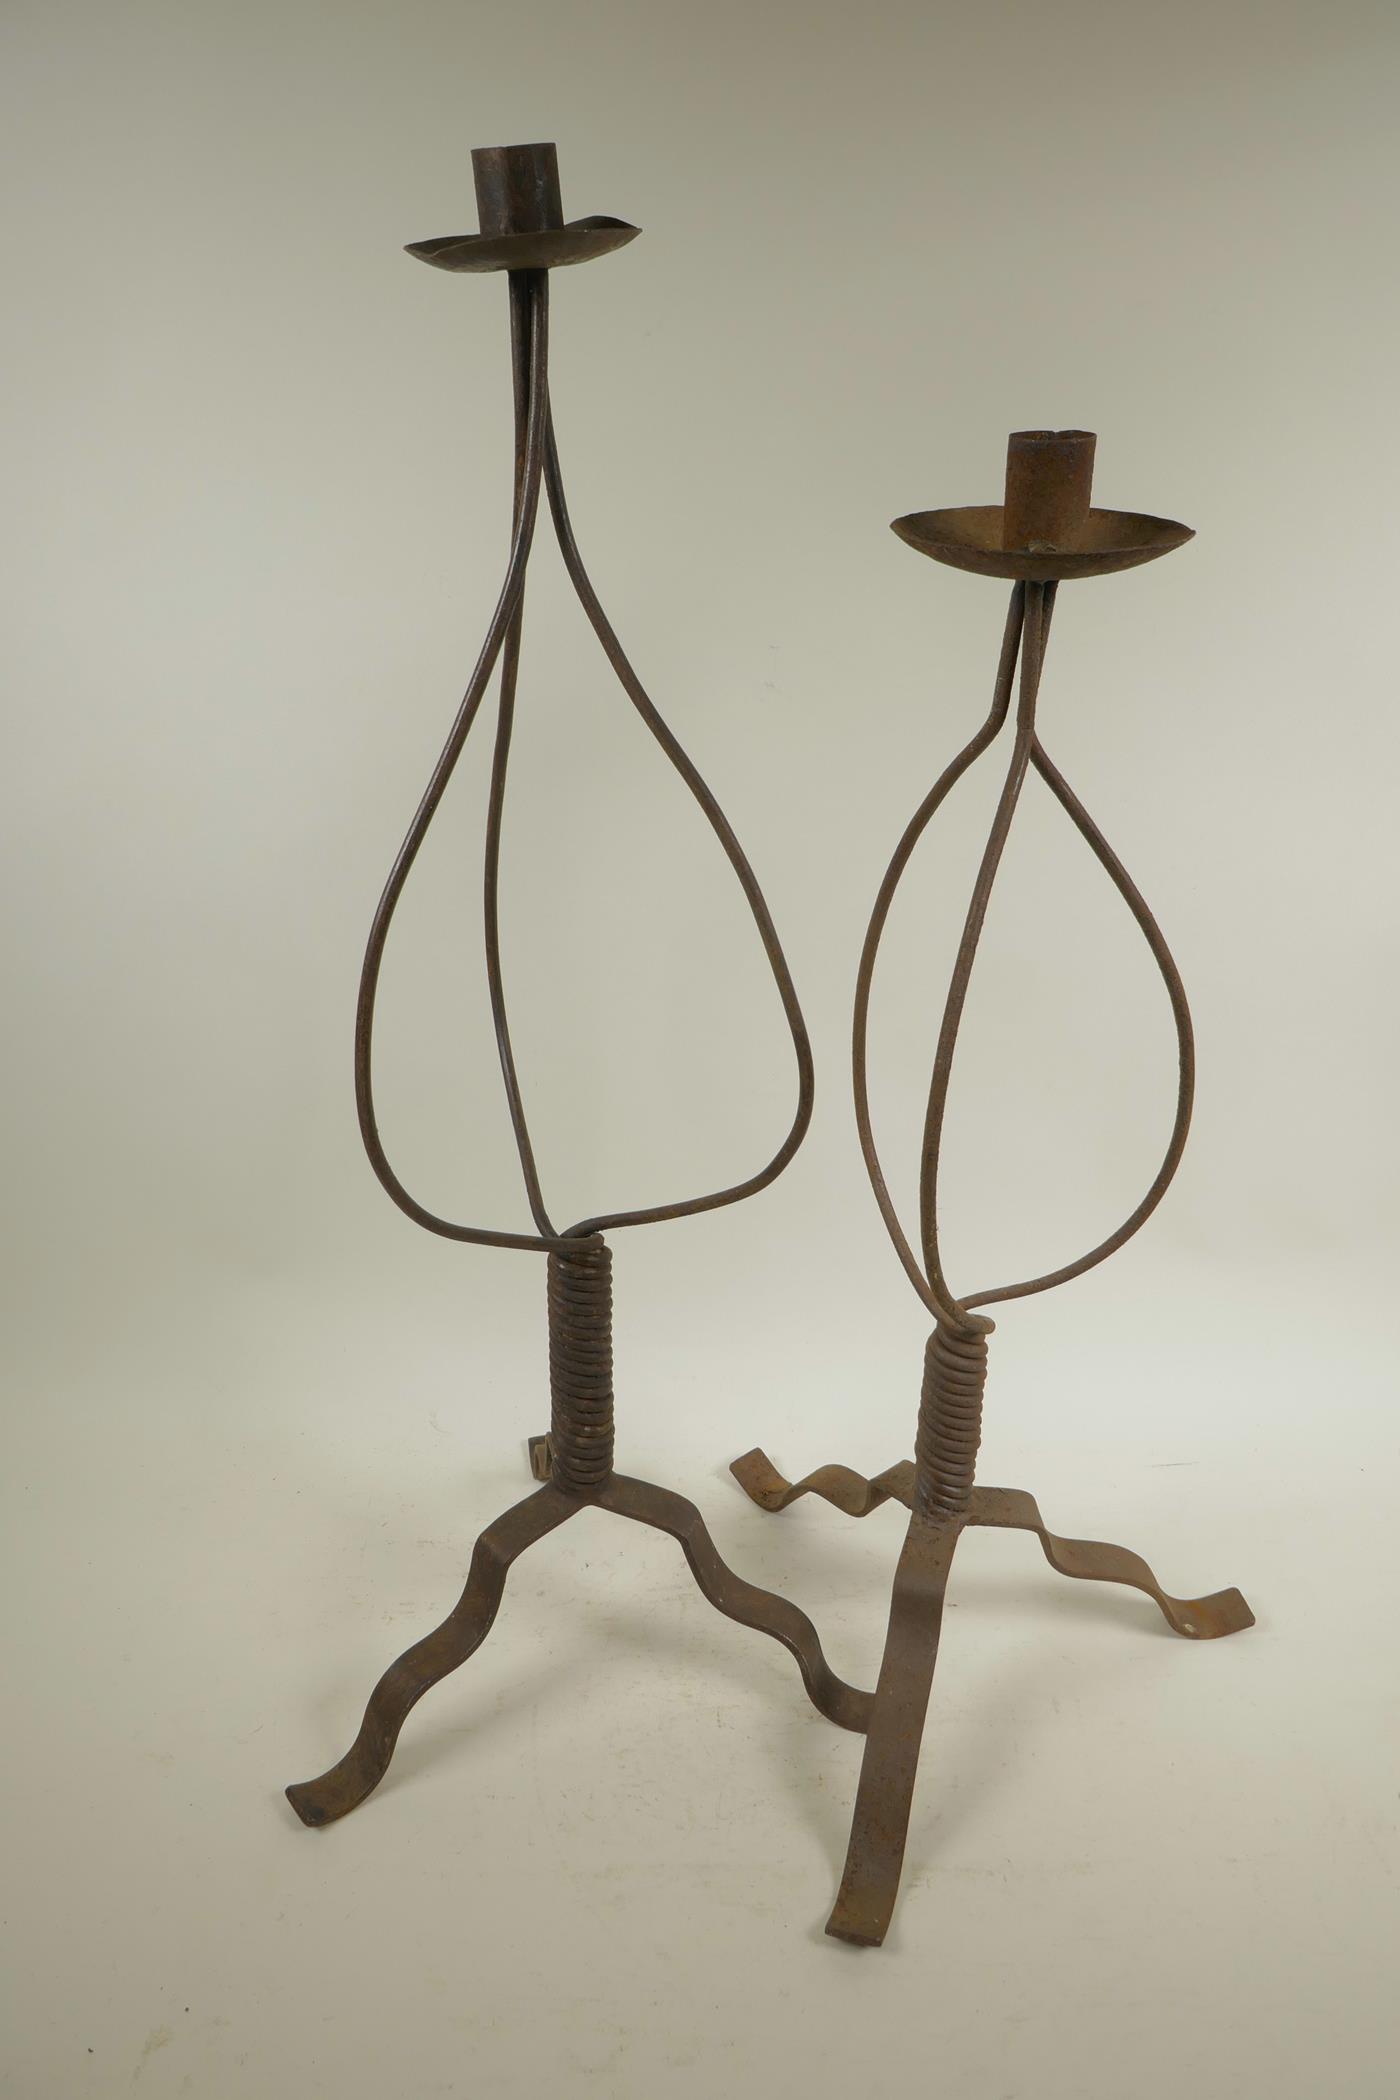 A wrought iron candlestick on tripod base, 24½" high, and another similar